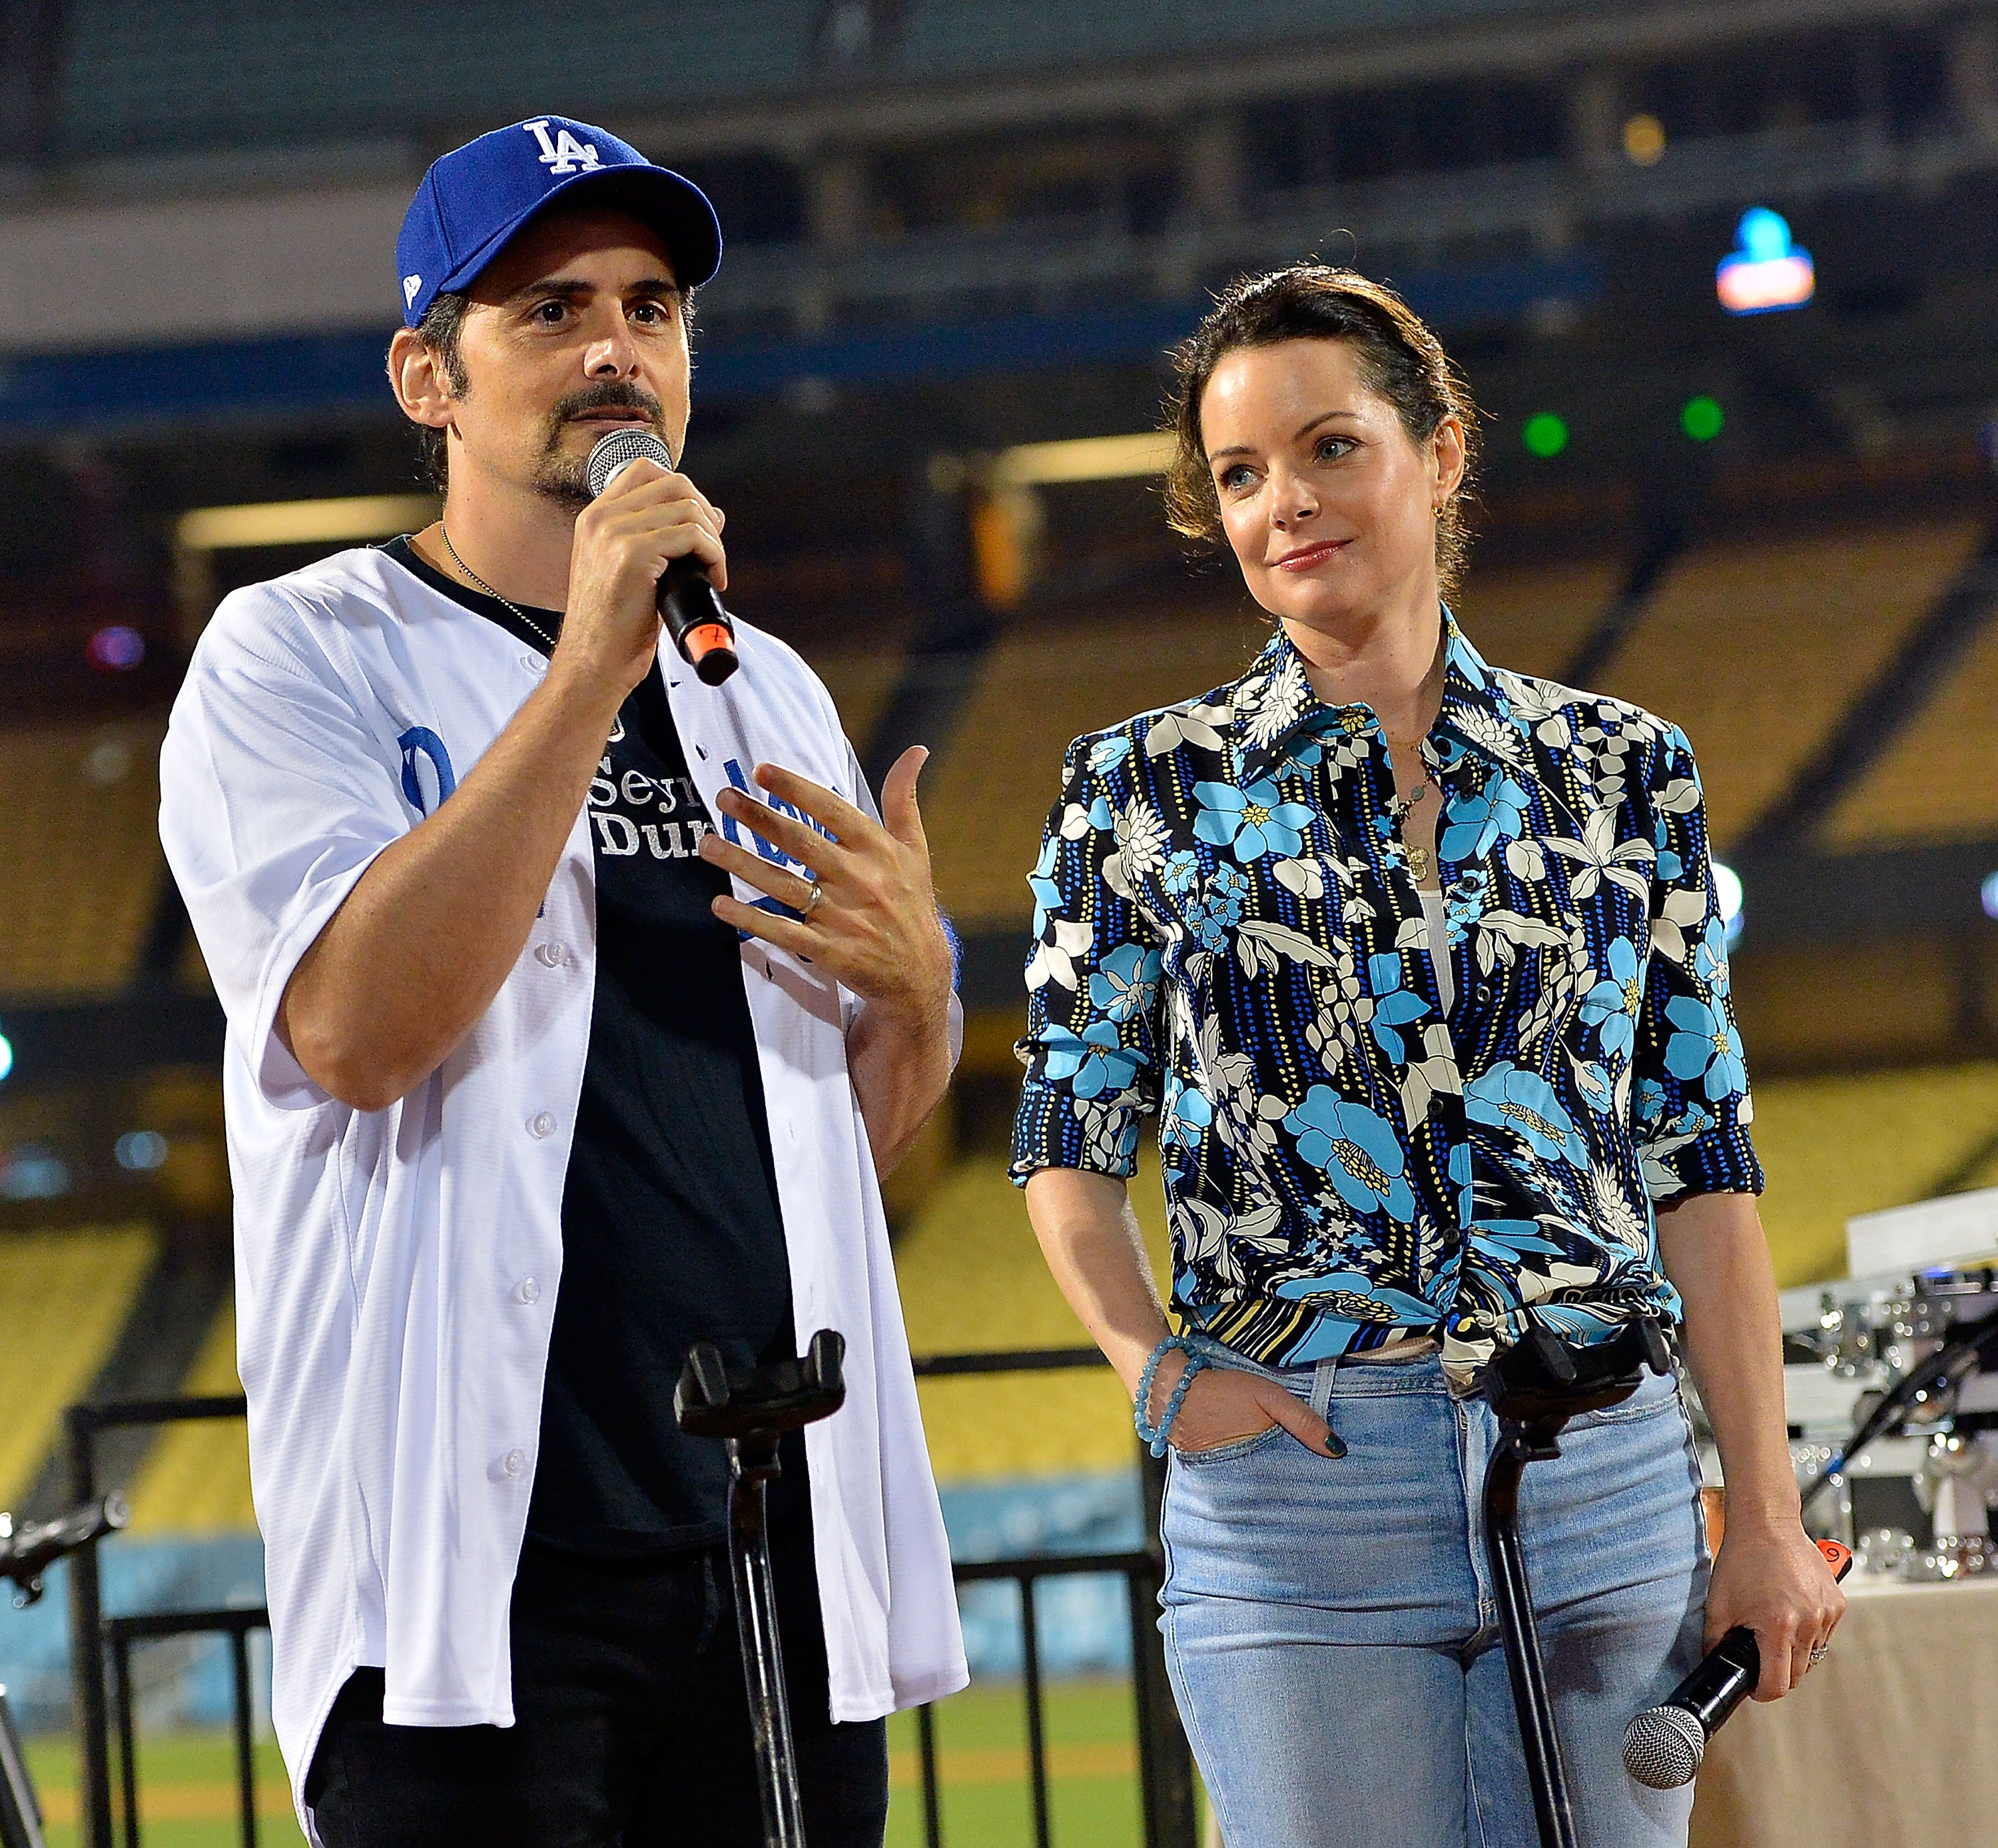 Brad Paisley and Kimberly Williams-Paisley on August 8, 2019 in Los Angeles, California | Source: Getty Images